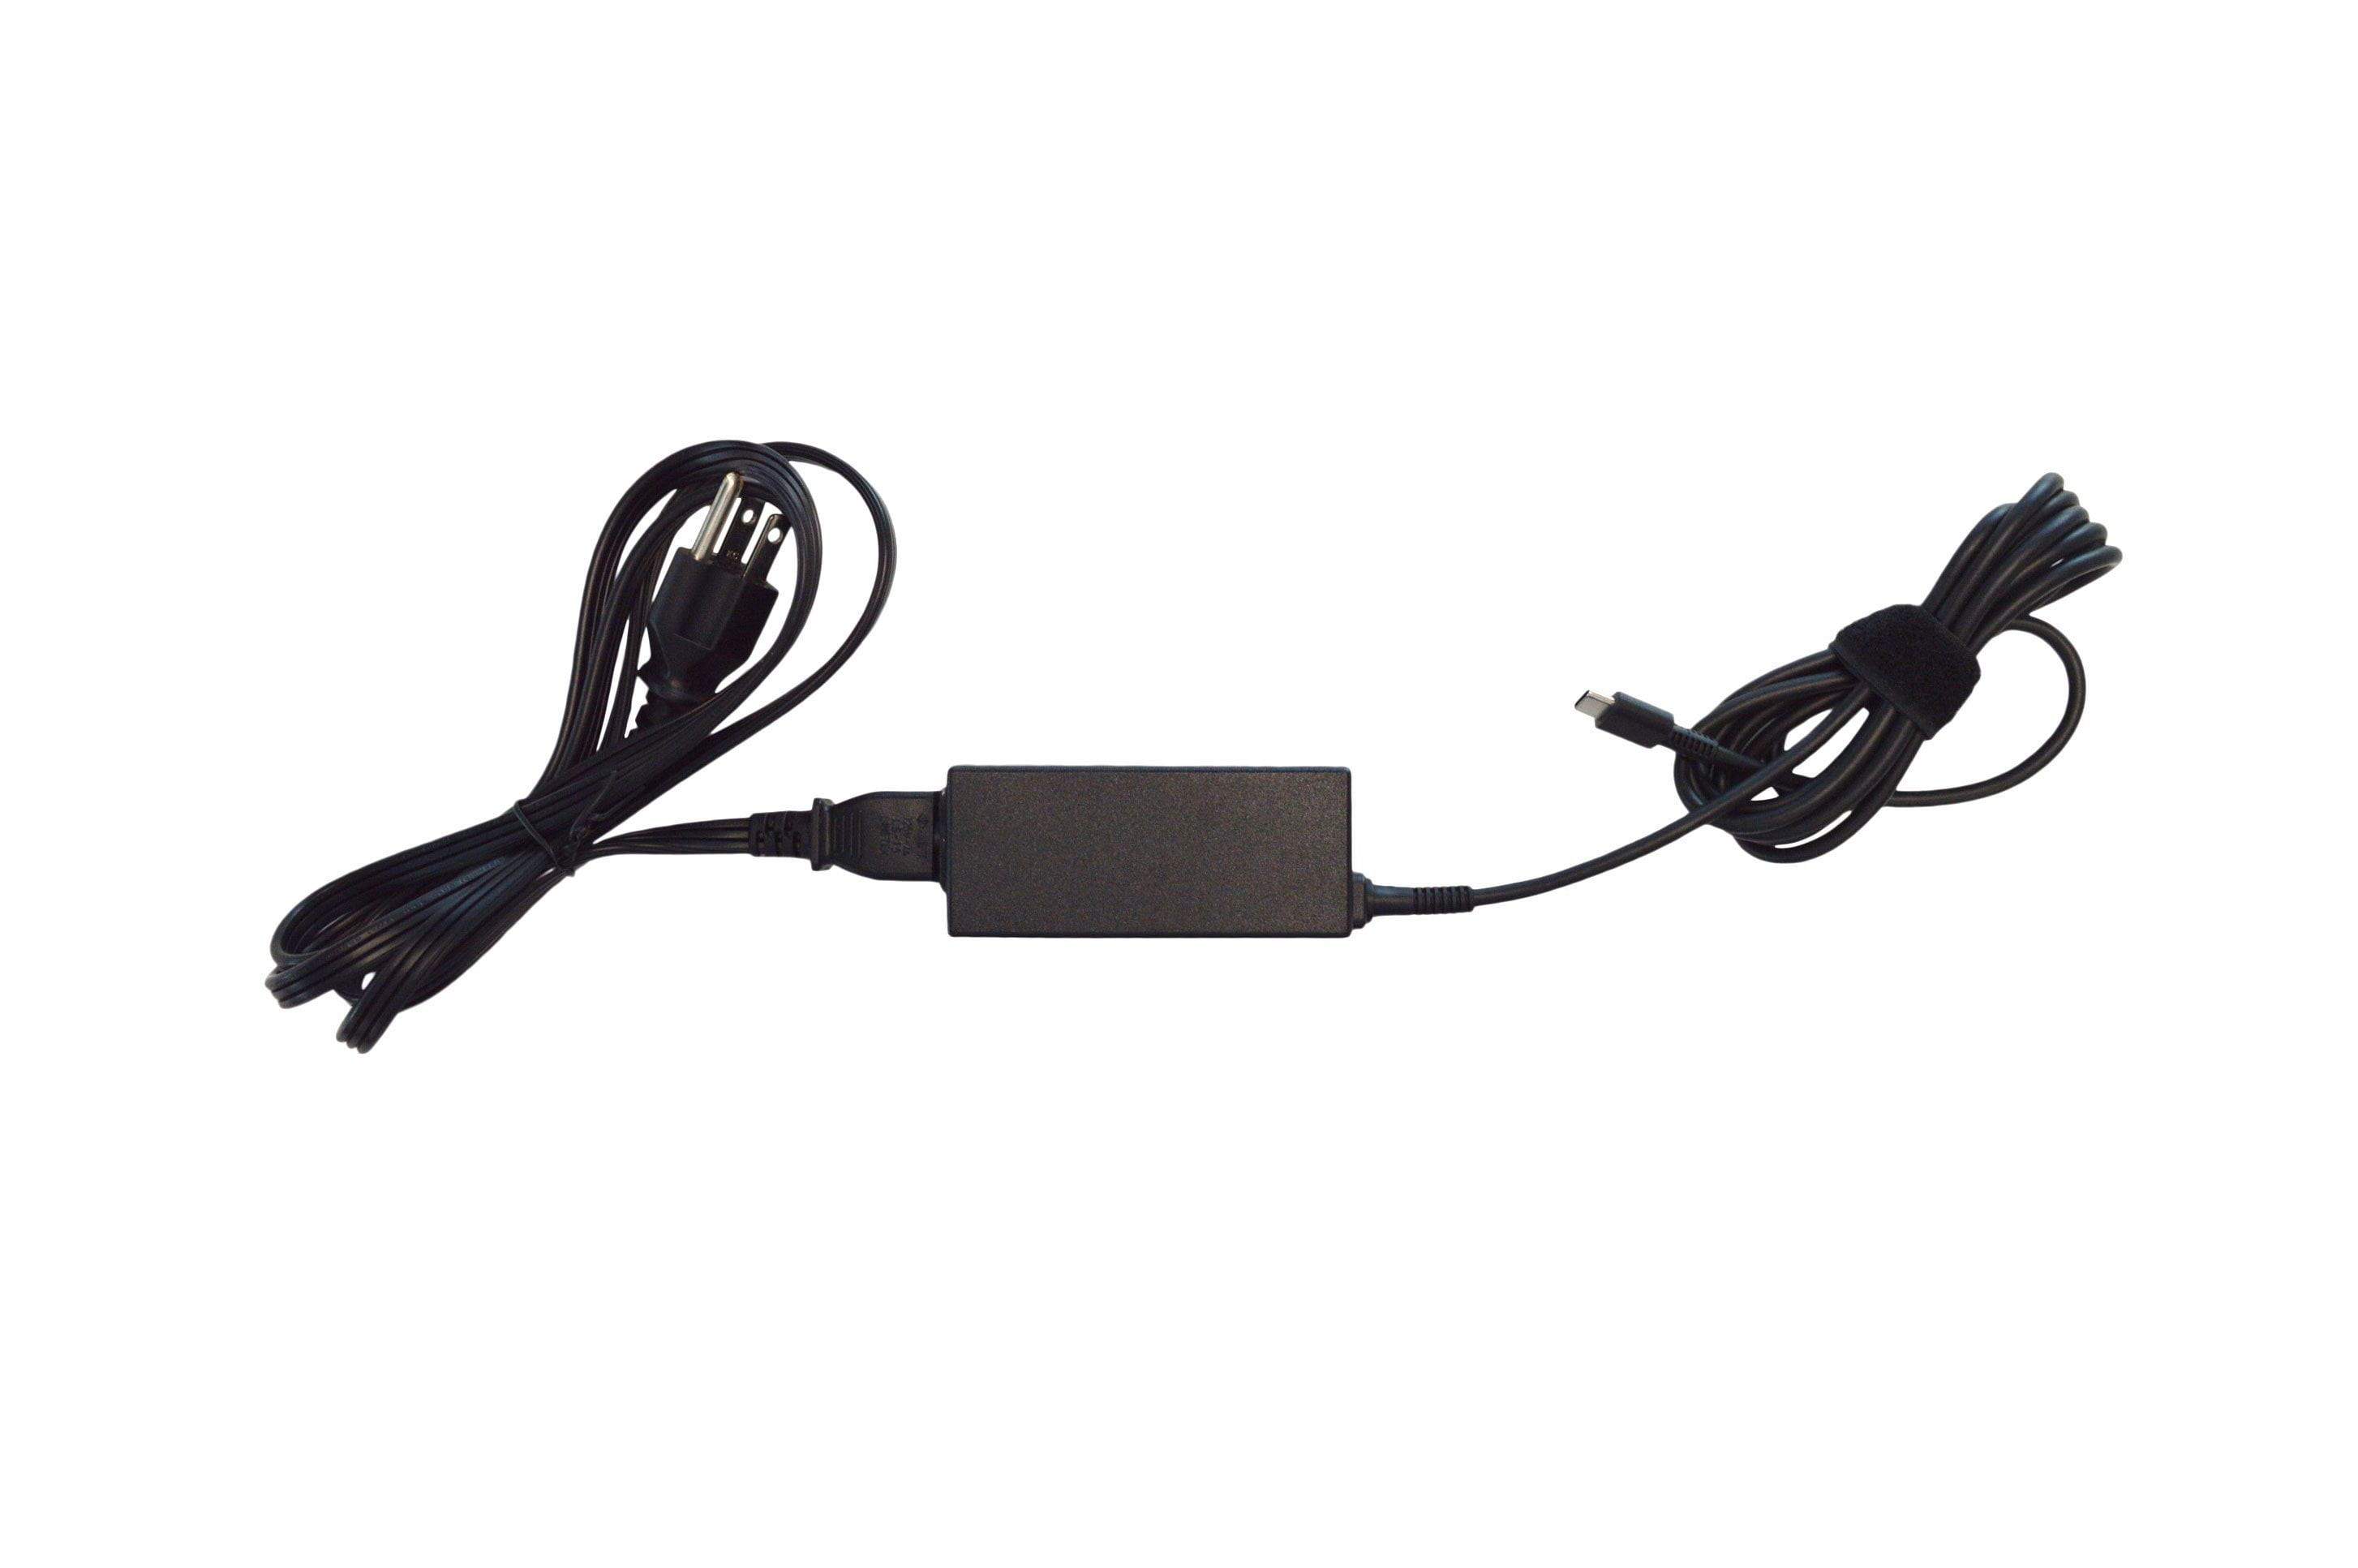 CTL Approved OEM USB C AC Adapter Supports NL7/NL71/NL72/J41/PX/VX11 M